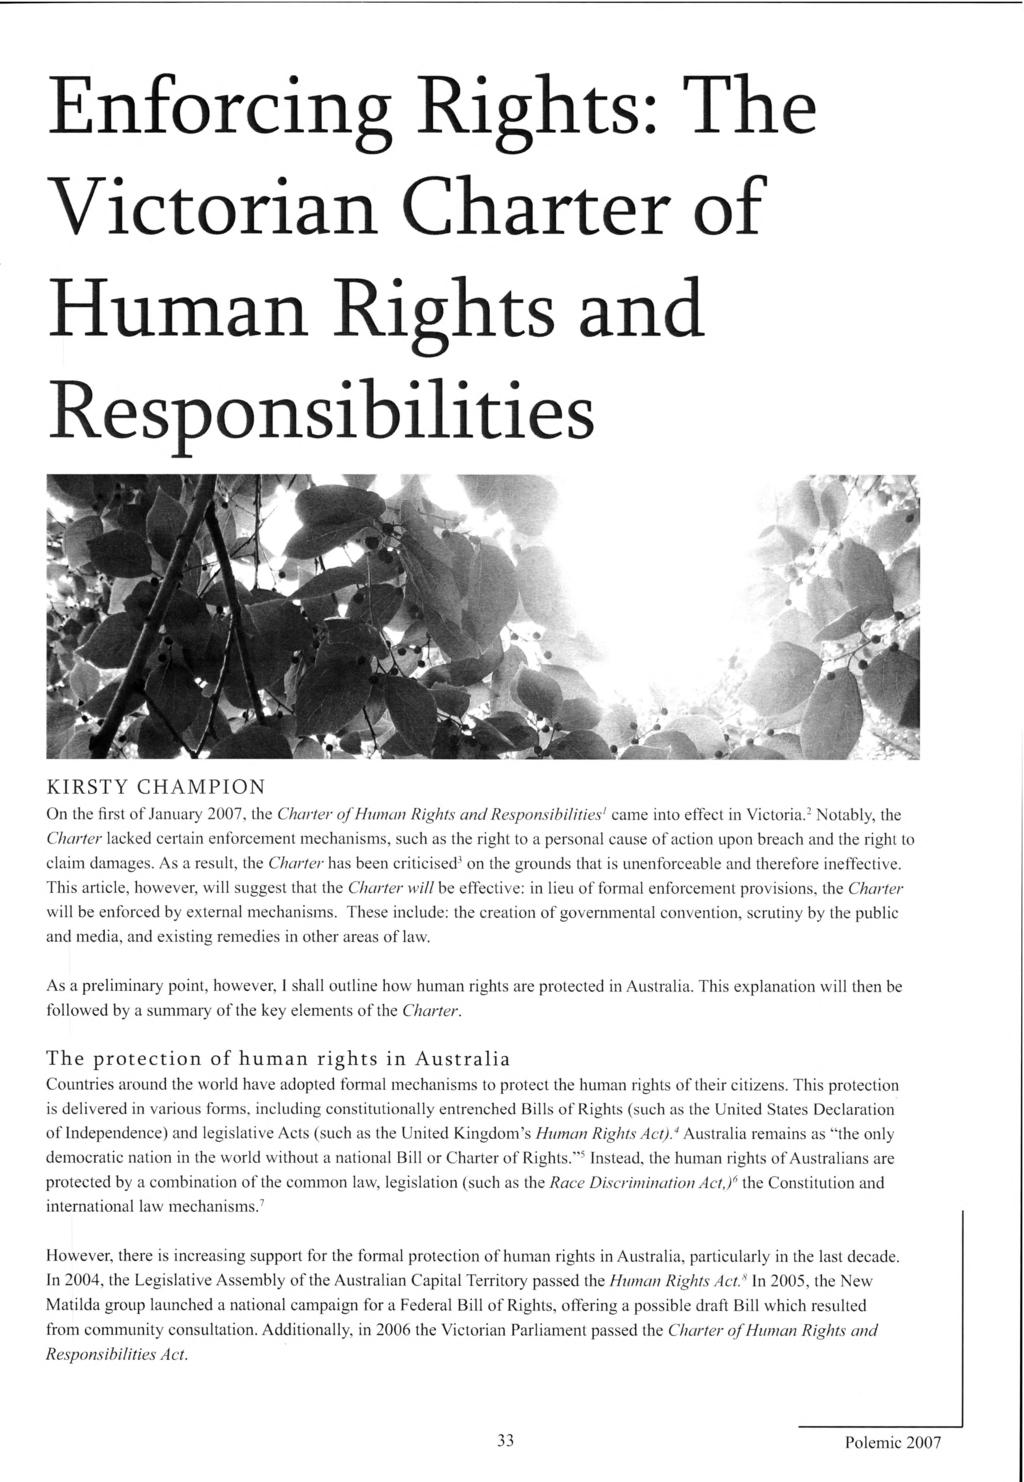 Enforcing Rights: The Victorian Charter of Human Rights and Responsibilities KIRSTY CHAMPION On the first of January 2007, the Charter of Human Rights and Responsibilities1 came into effect in